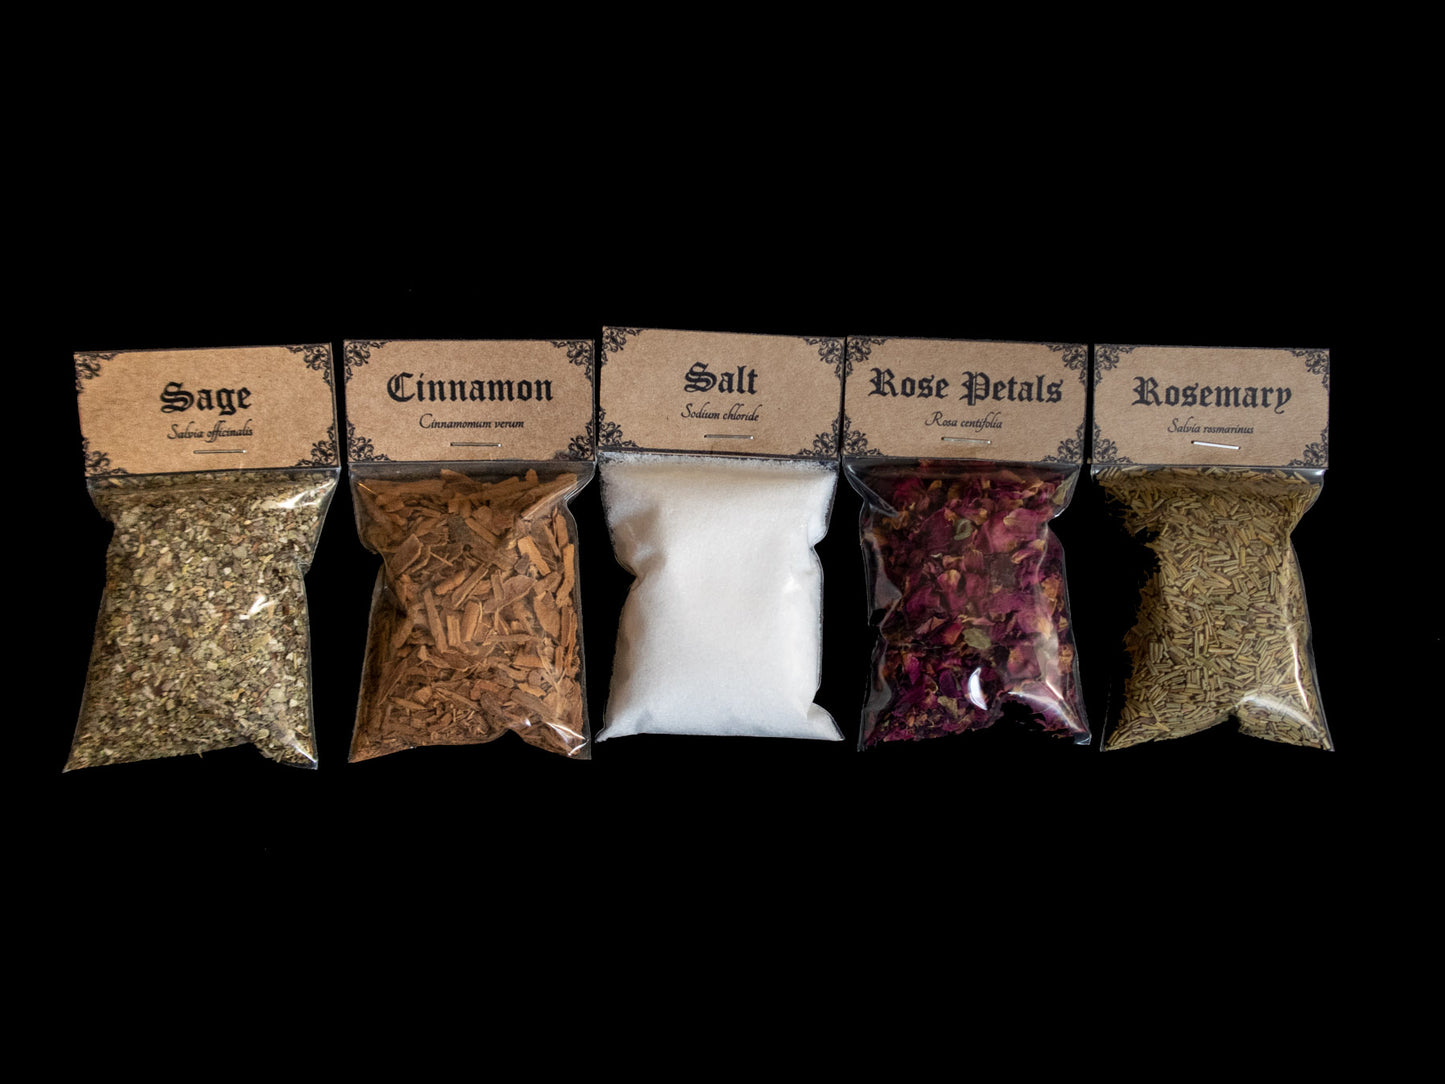 Small Beginner Herb kit: A collection of 5 bags of herbs - Victorian-apothecary-style brown labels at the top give the common and Latin names